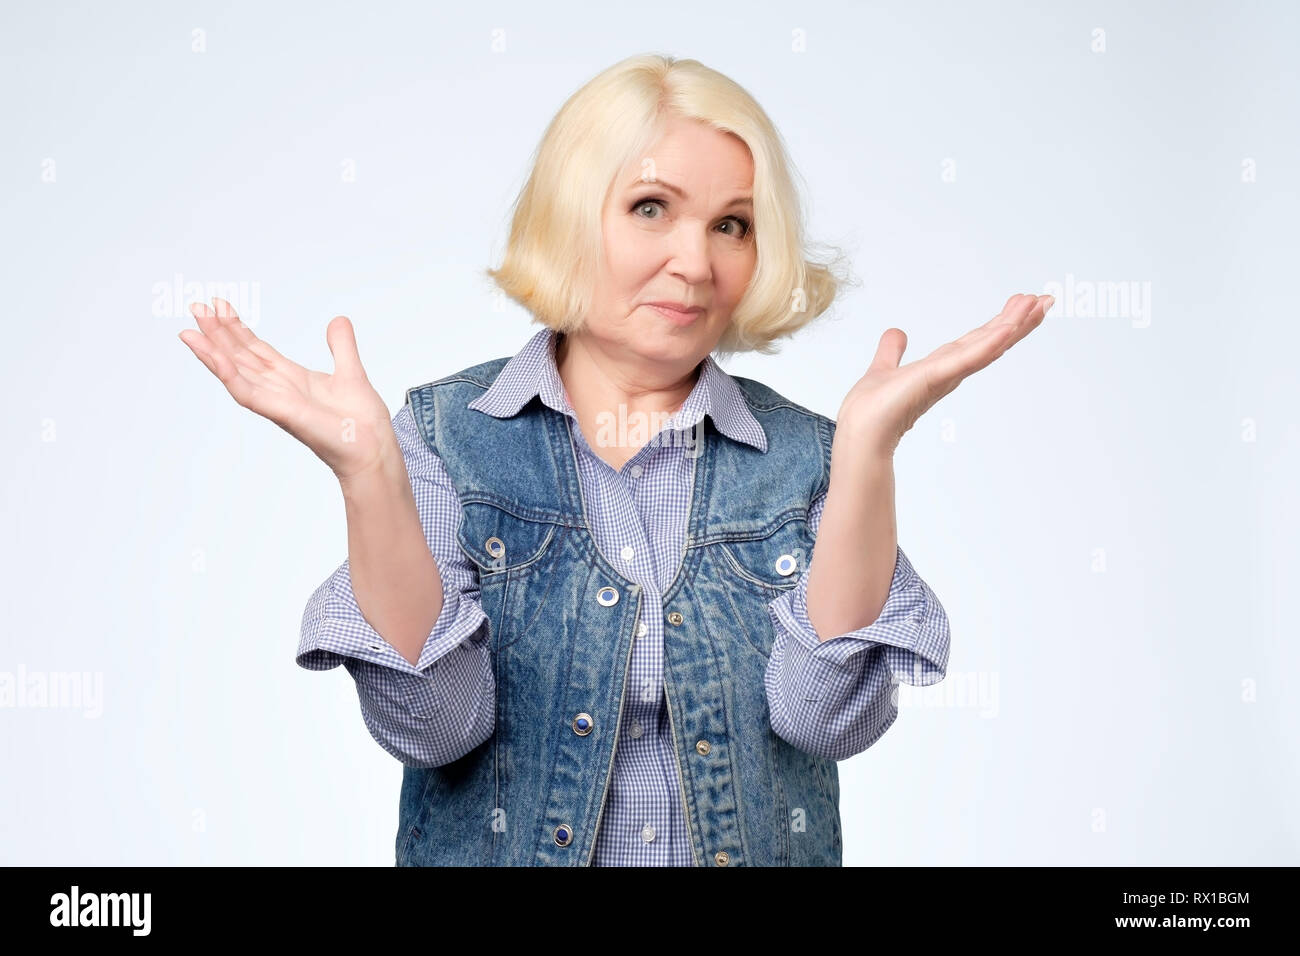 Angry old woman arguing and shrugging her hand Stock Photo